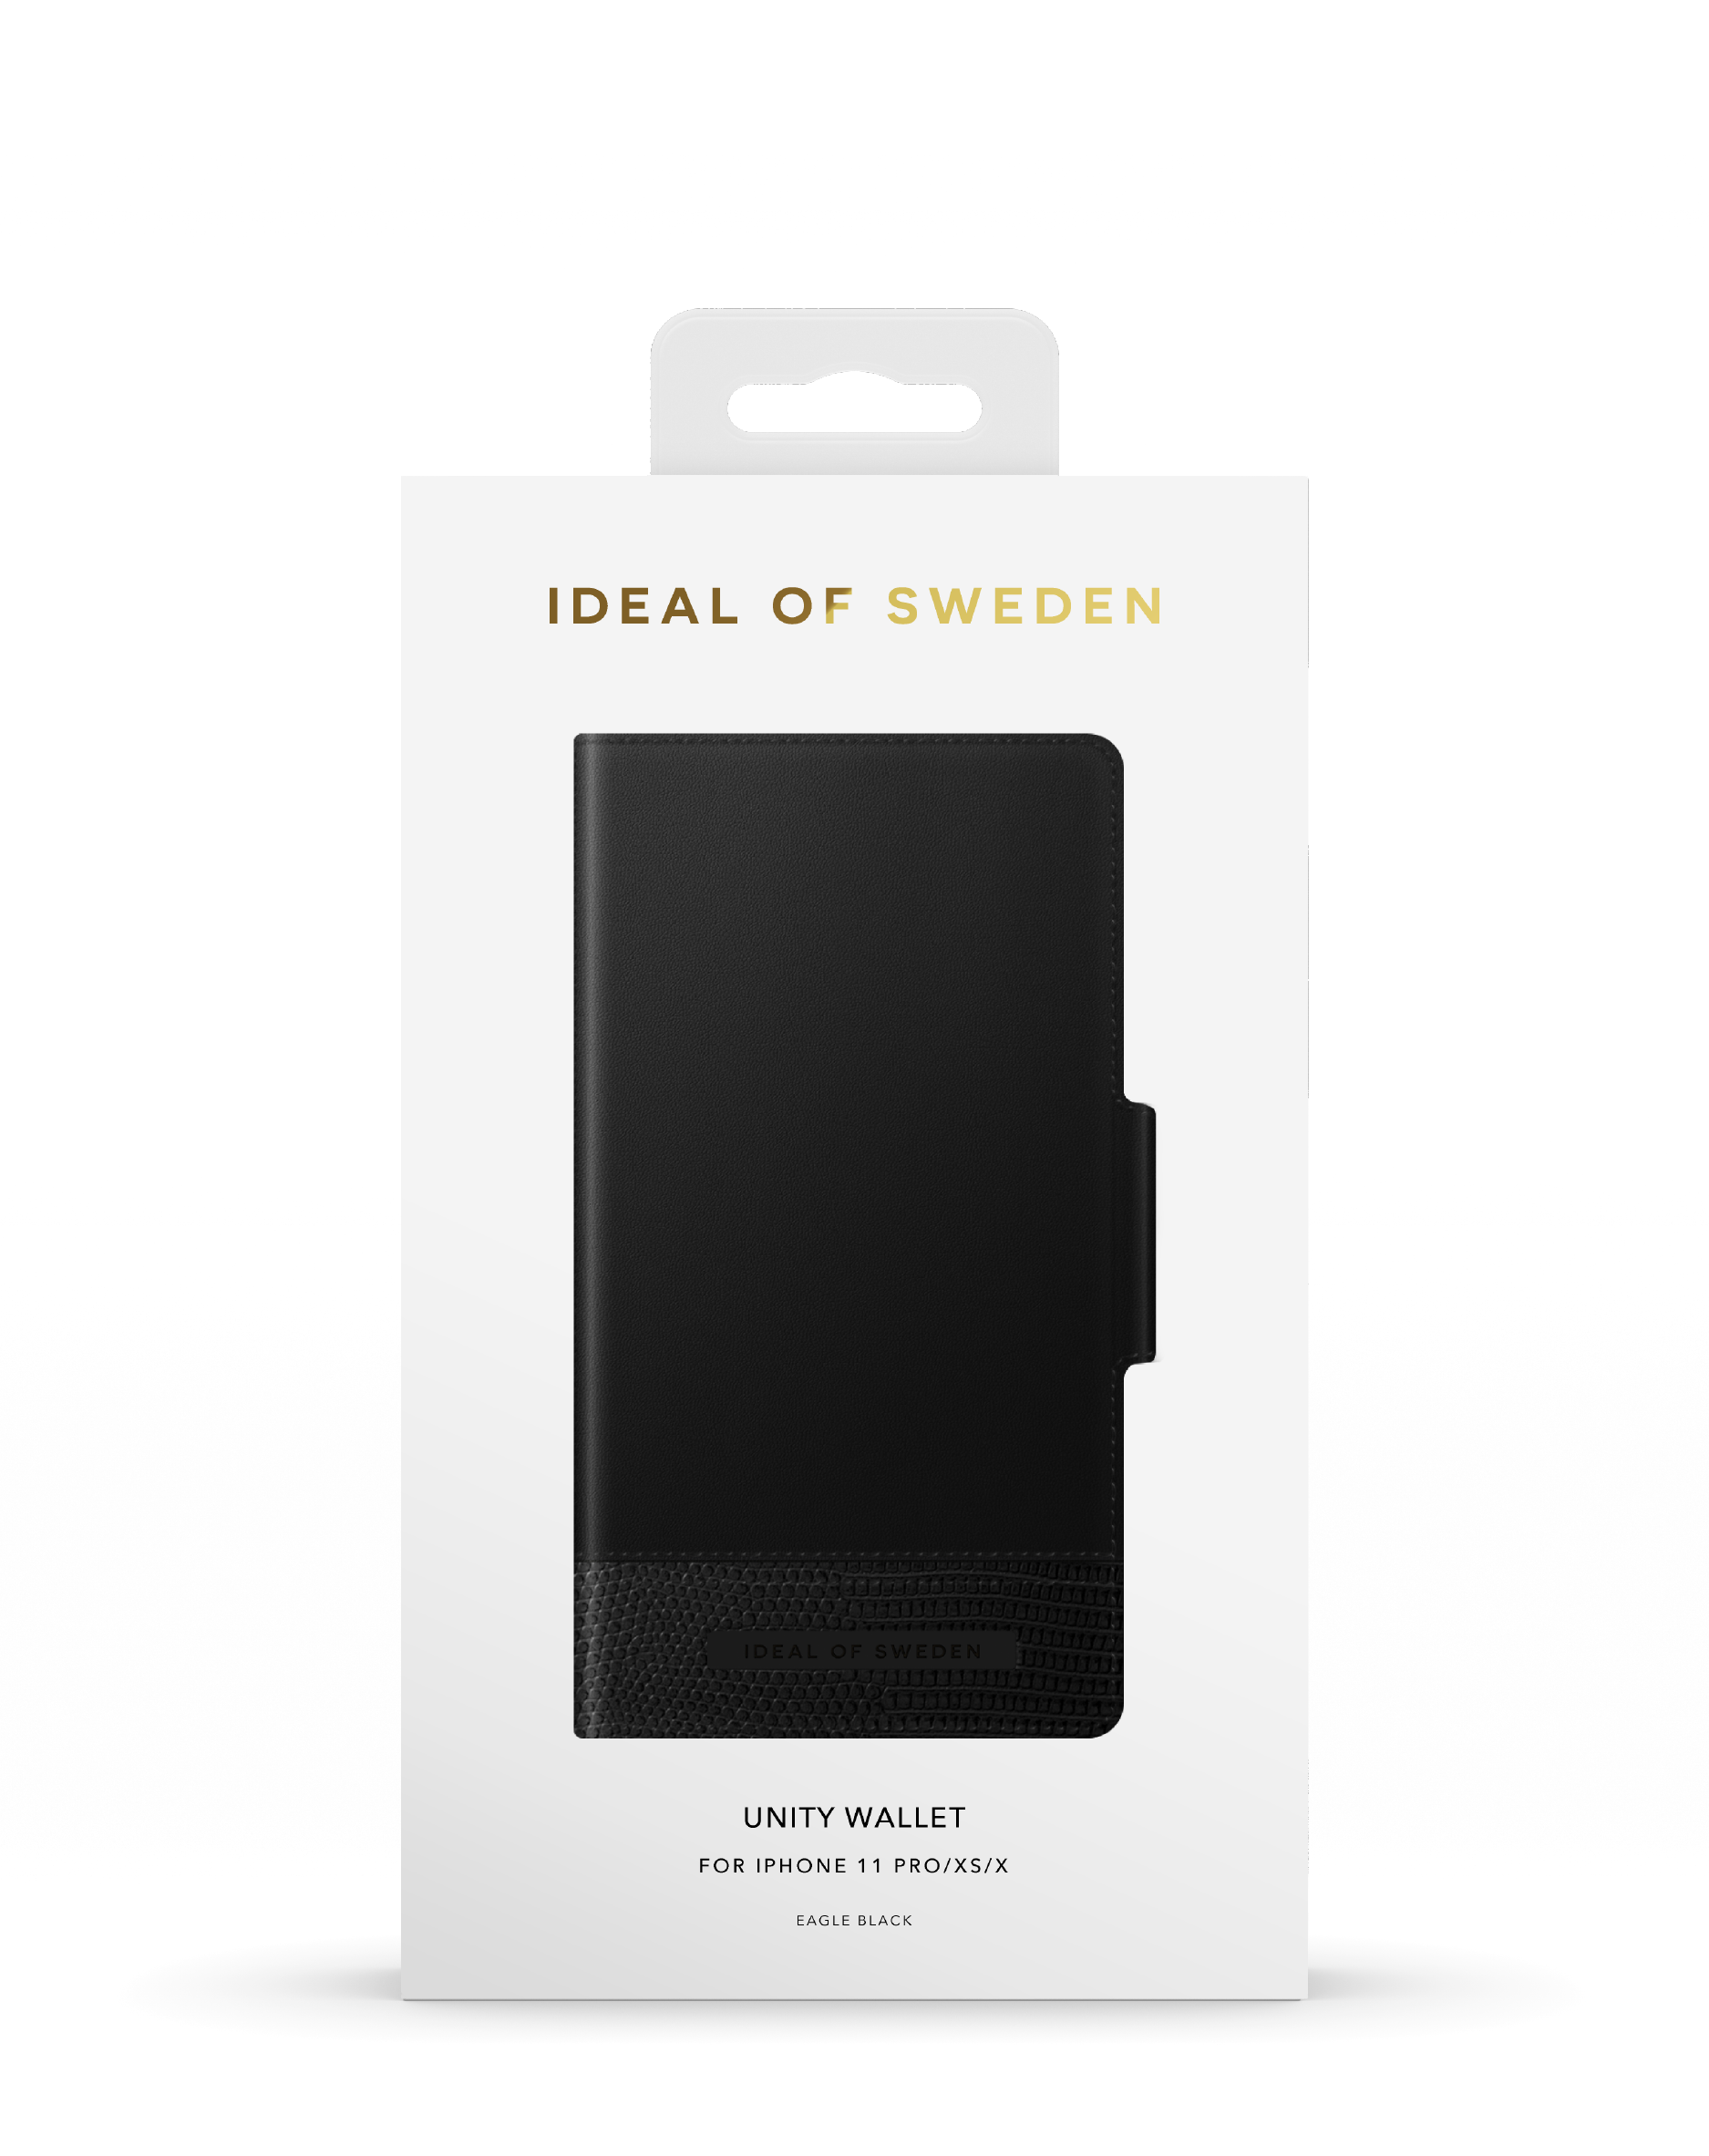 IDEAL OF SWEDEN IDUWAW20-1958-229, Full XS, Apple, iPhone Black Pro, iPhone Cover, 11 X, Eagle iPhone